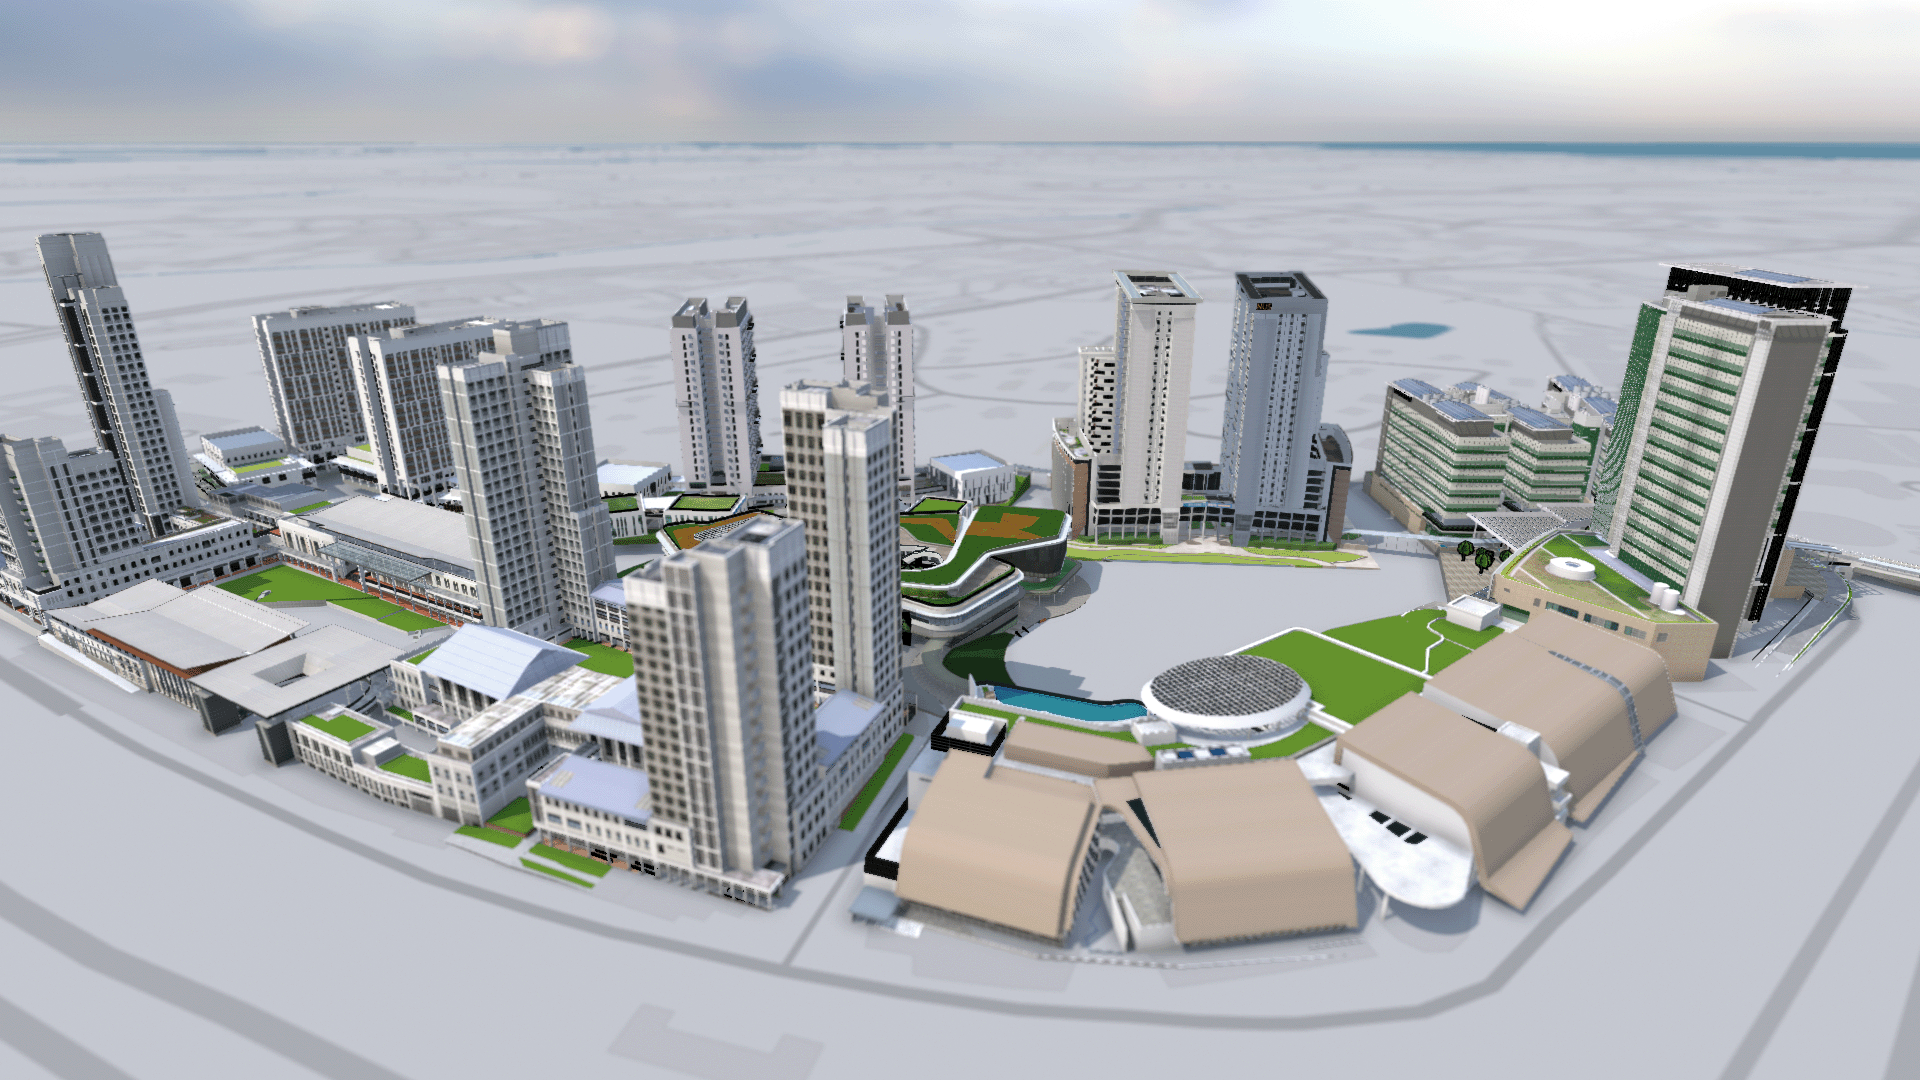 Digital simulation of NUS University Town obtained from the NUS Digital Twin platform which researchers and industry partners can use to run simulations and test sustainability solutions.